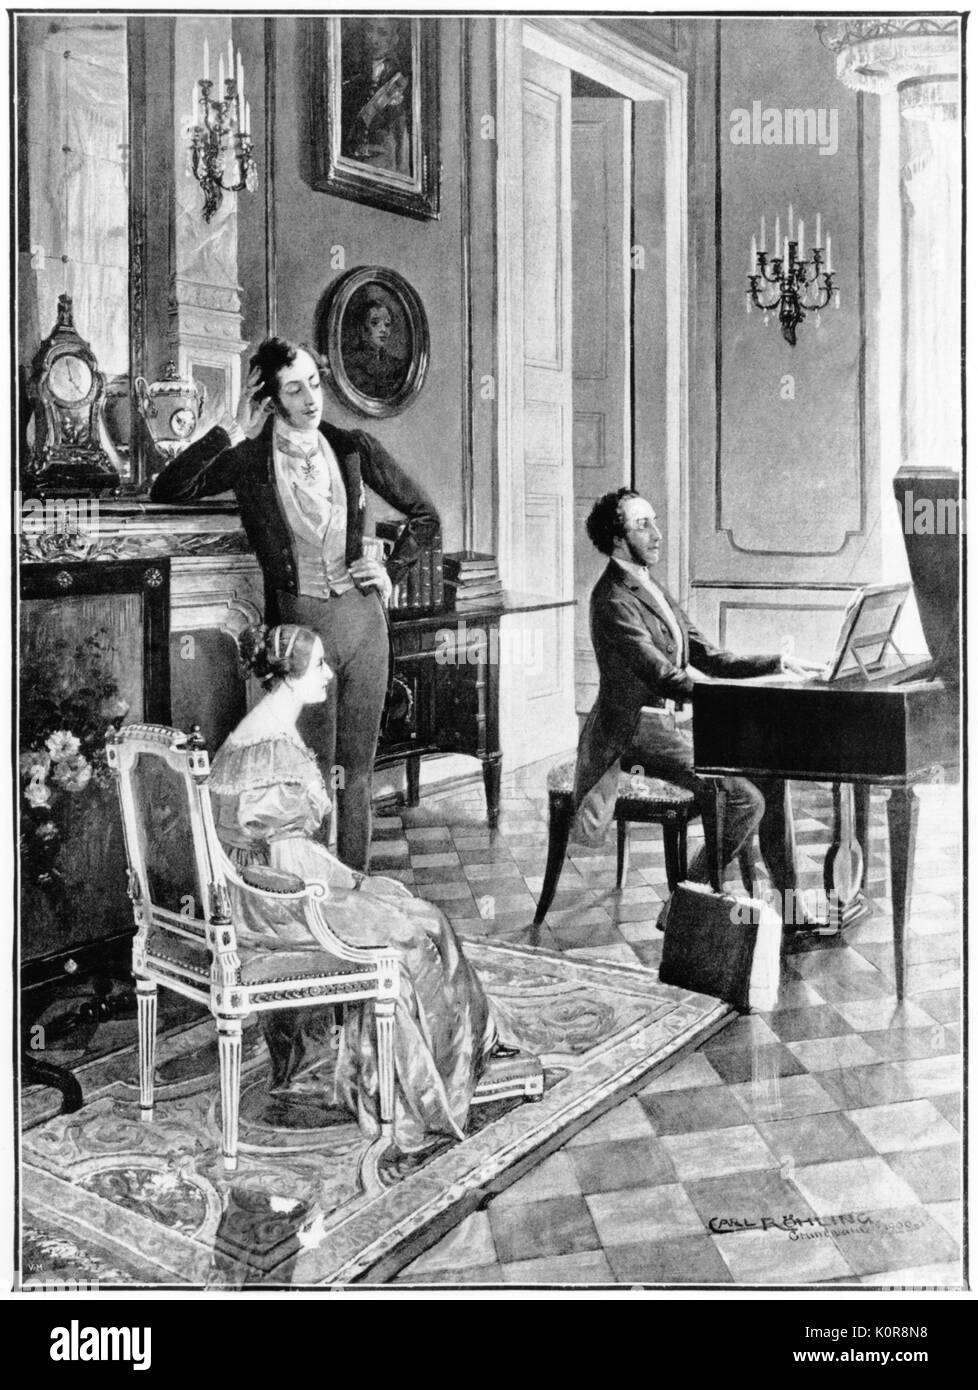 Felix Mendelssohn - portrait of the German composer playing to Victoria & Albert. 3 February 1809 - 4 November 1847. Painting by Carl Rohling (1849-1922), dated as 1900. Stock Photo